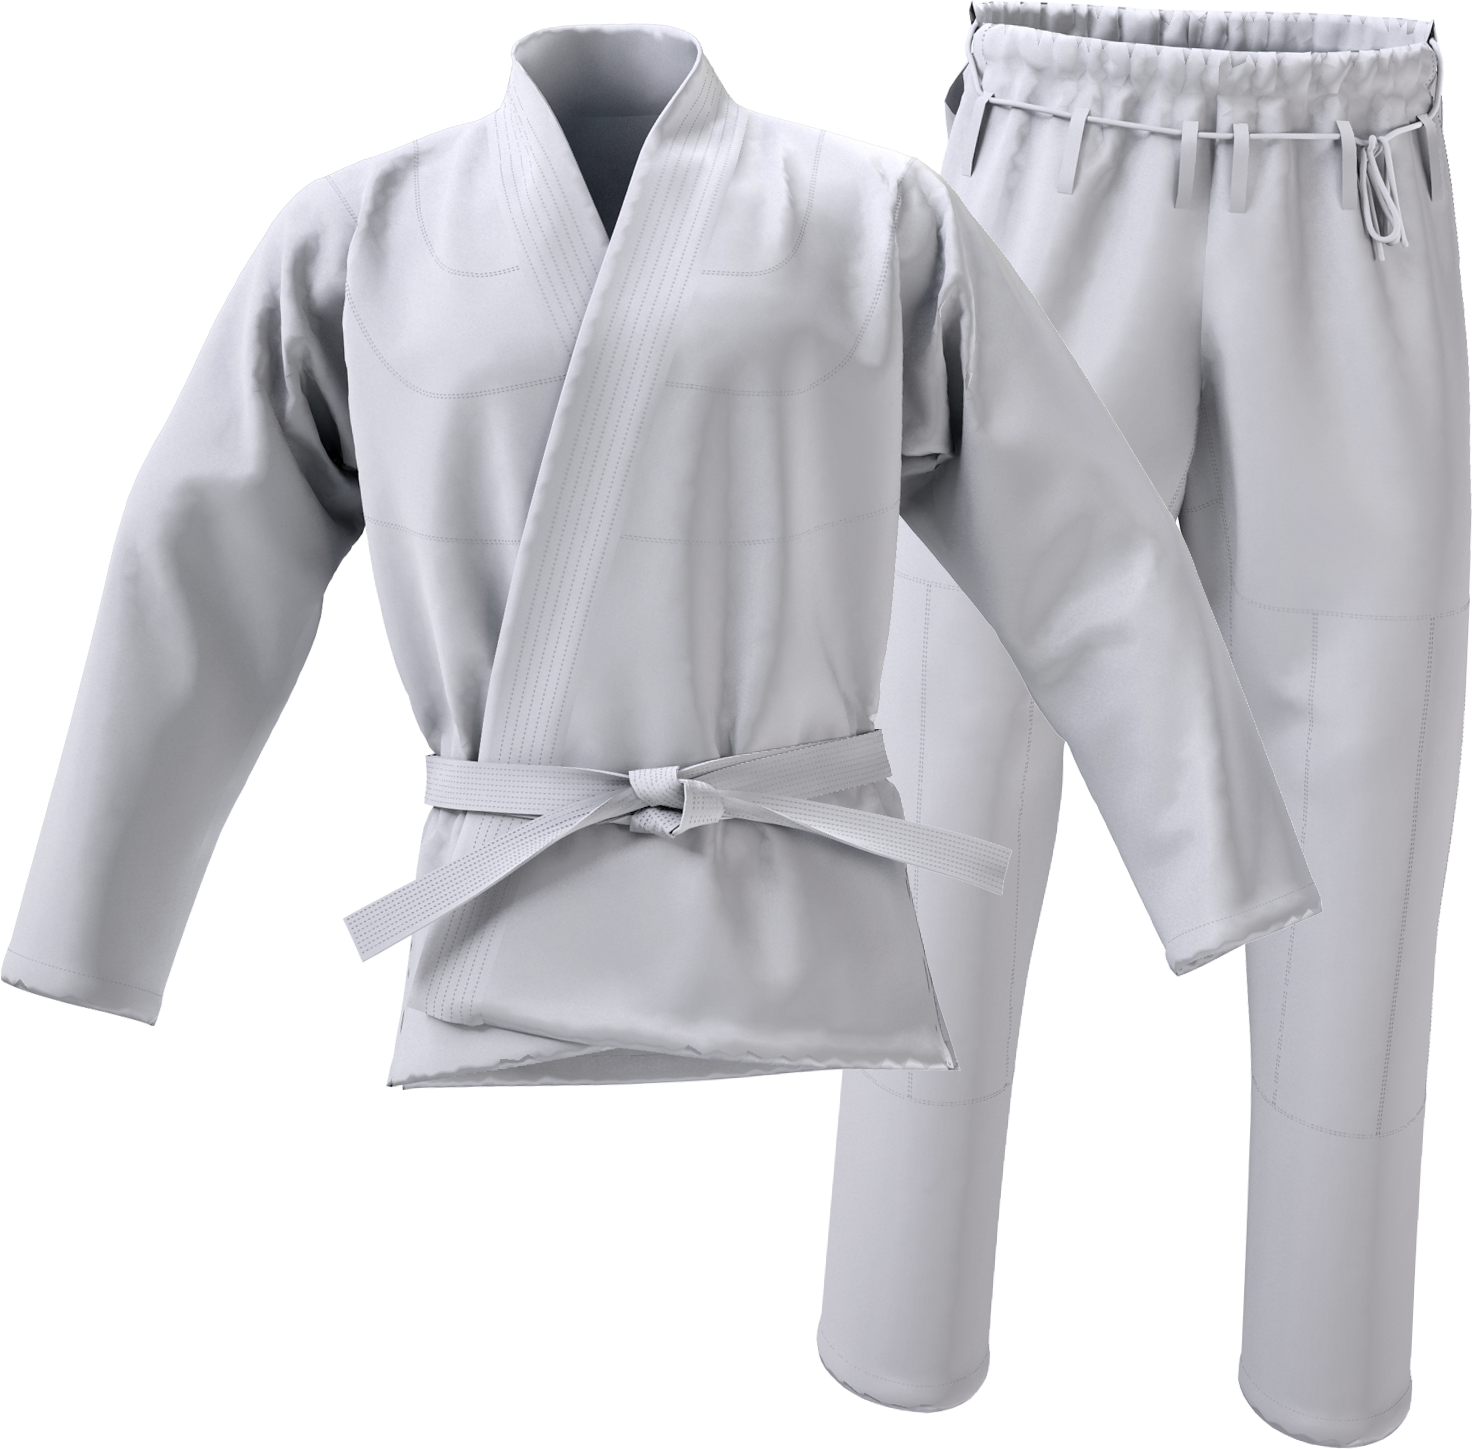 a white karate uniform with long sleeves and pants